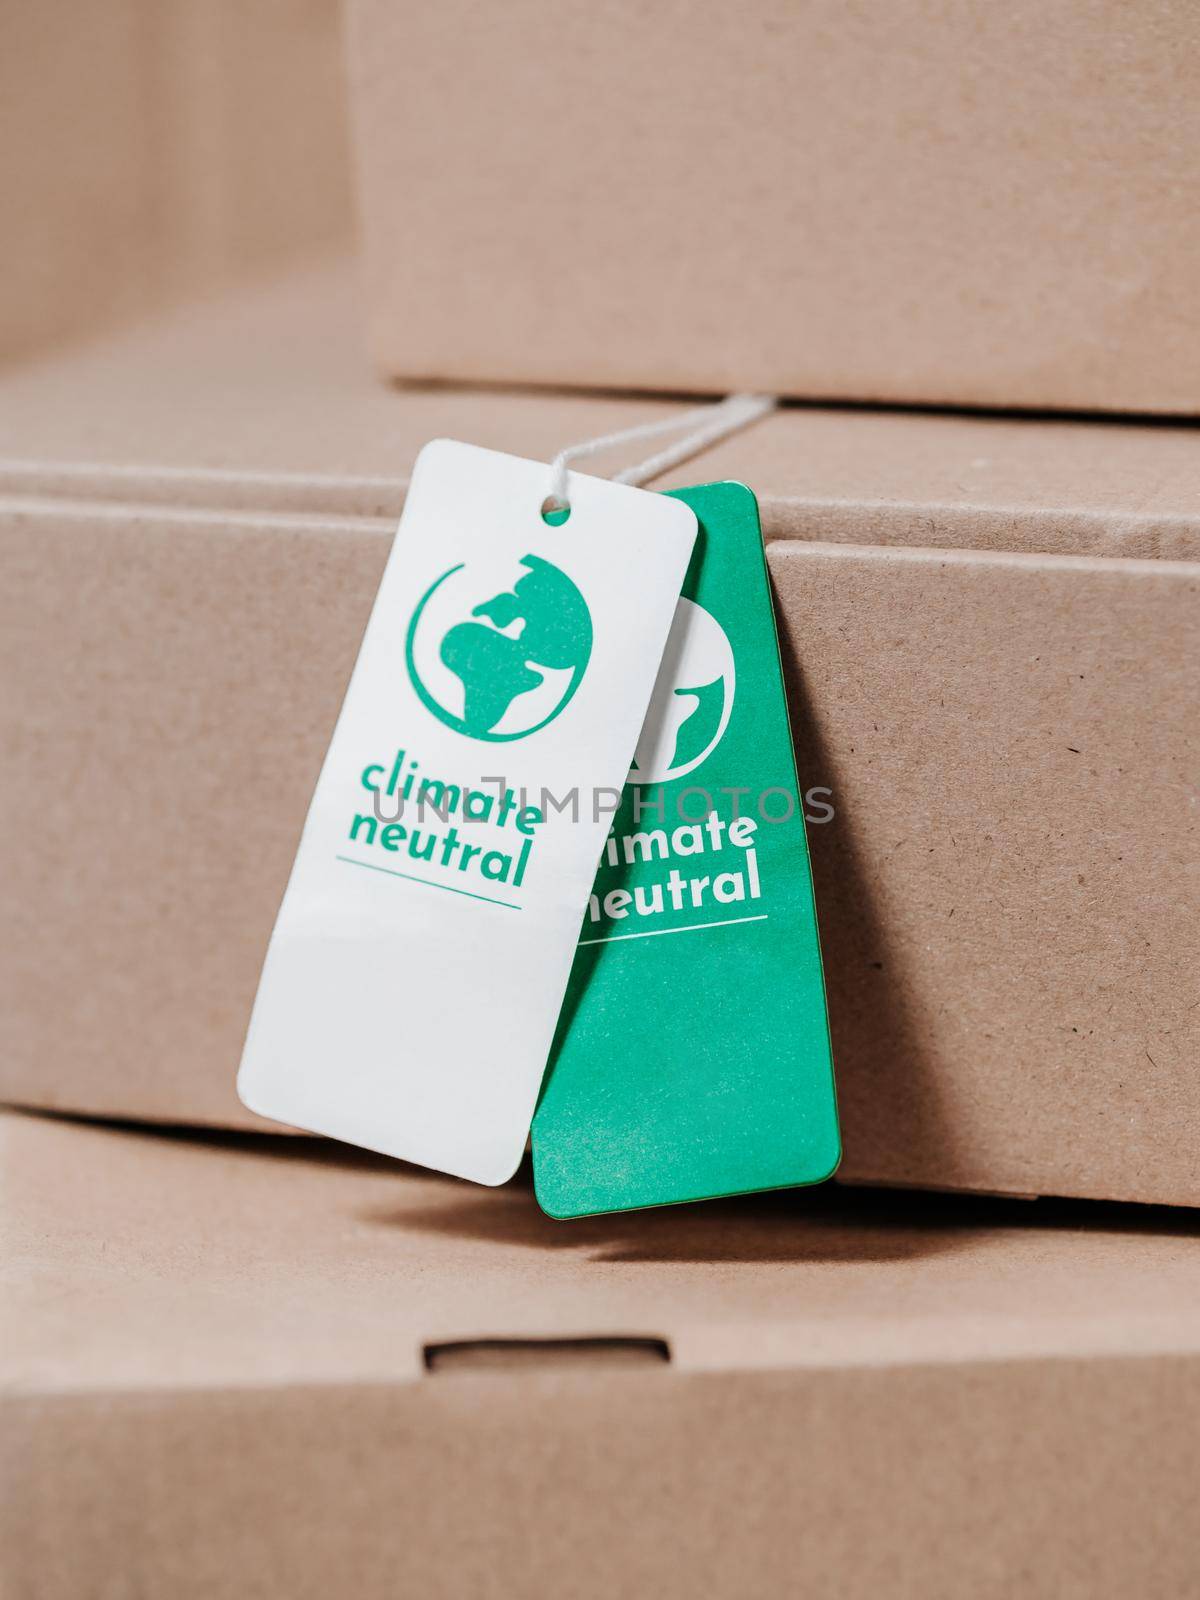 Carbon neutral product in craft boxes, Label Climate neutral. Carbon neutral concept in apparel, fashion, logistics industry. Ethical consumption. Increasing awareness for customers - carbon footpint